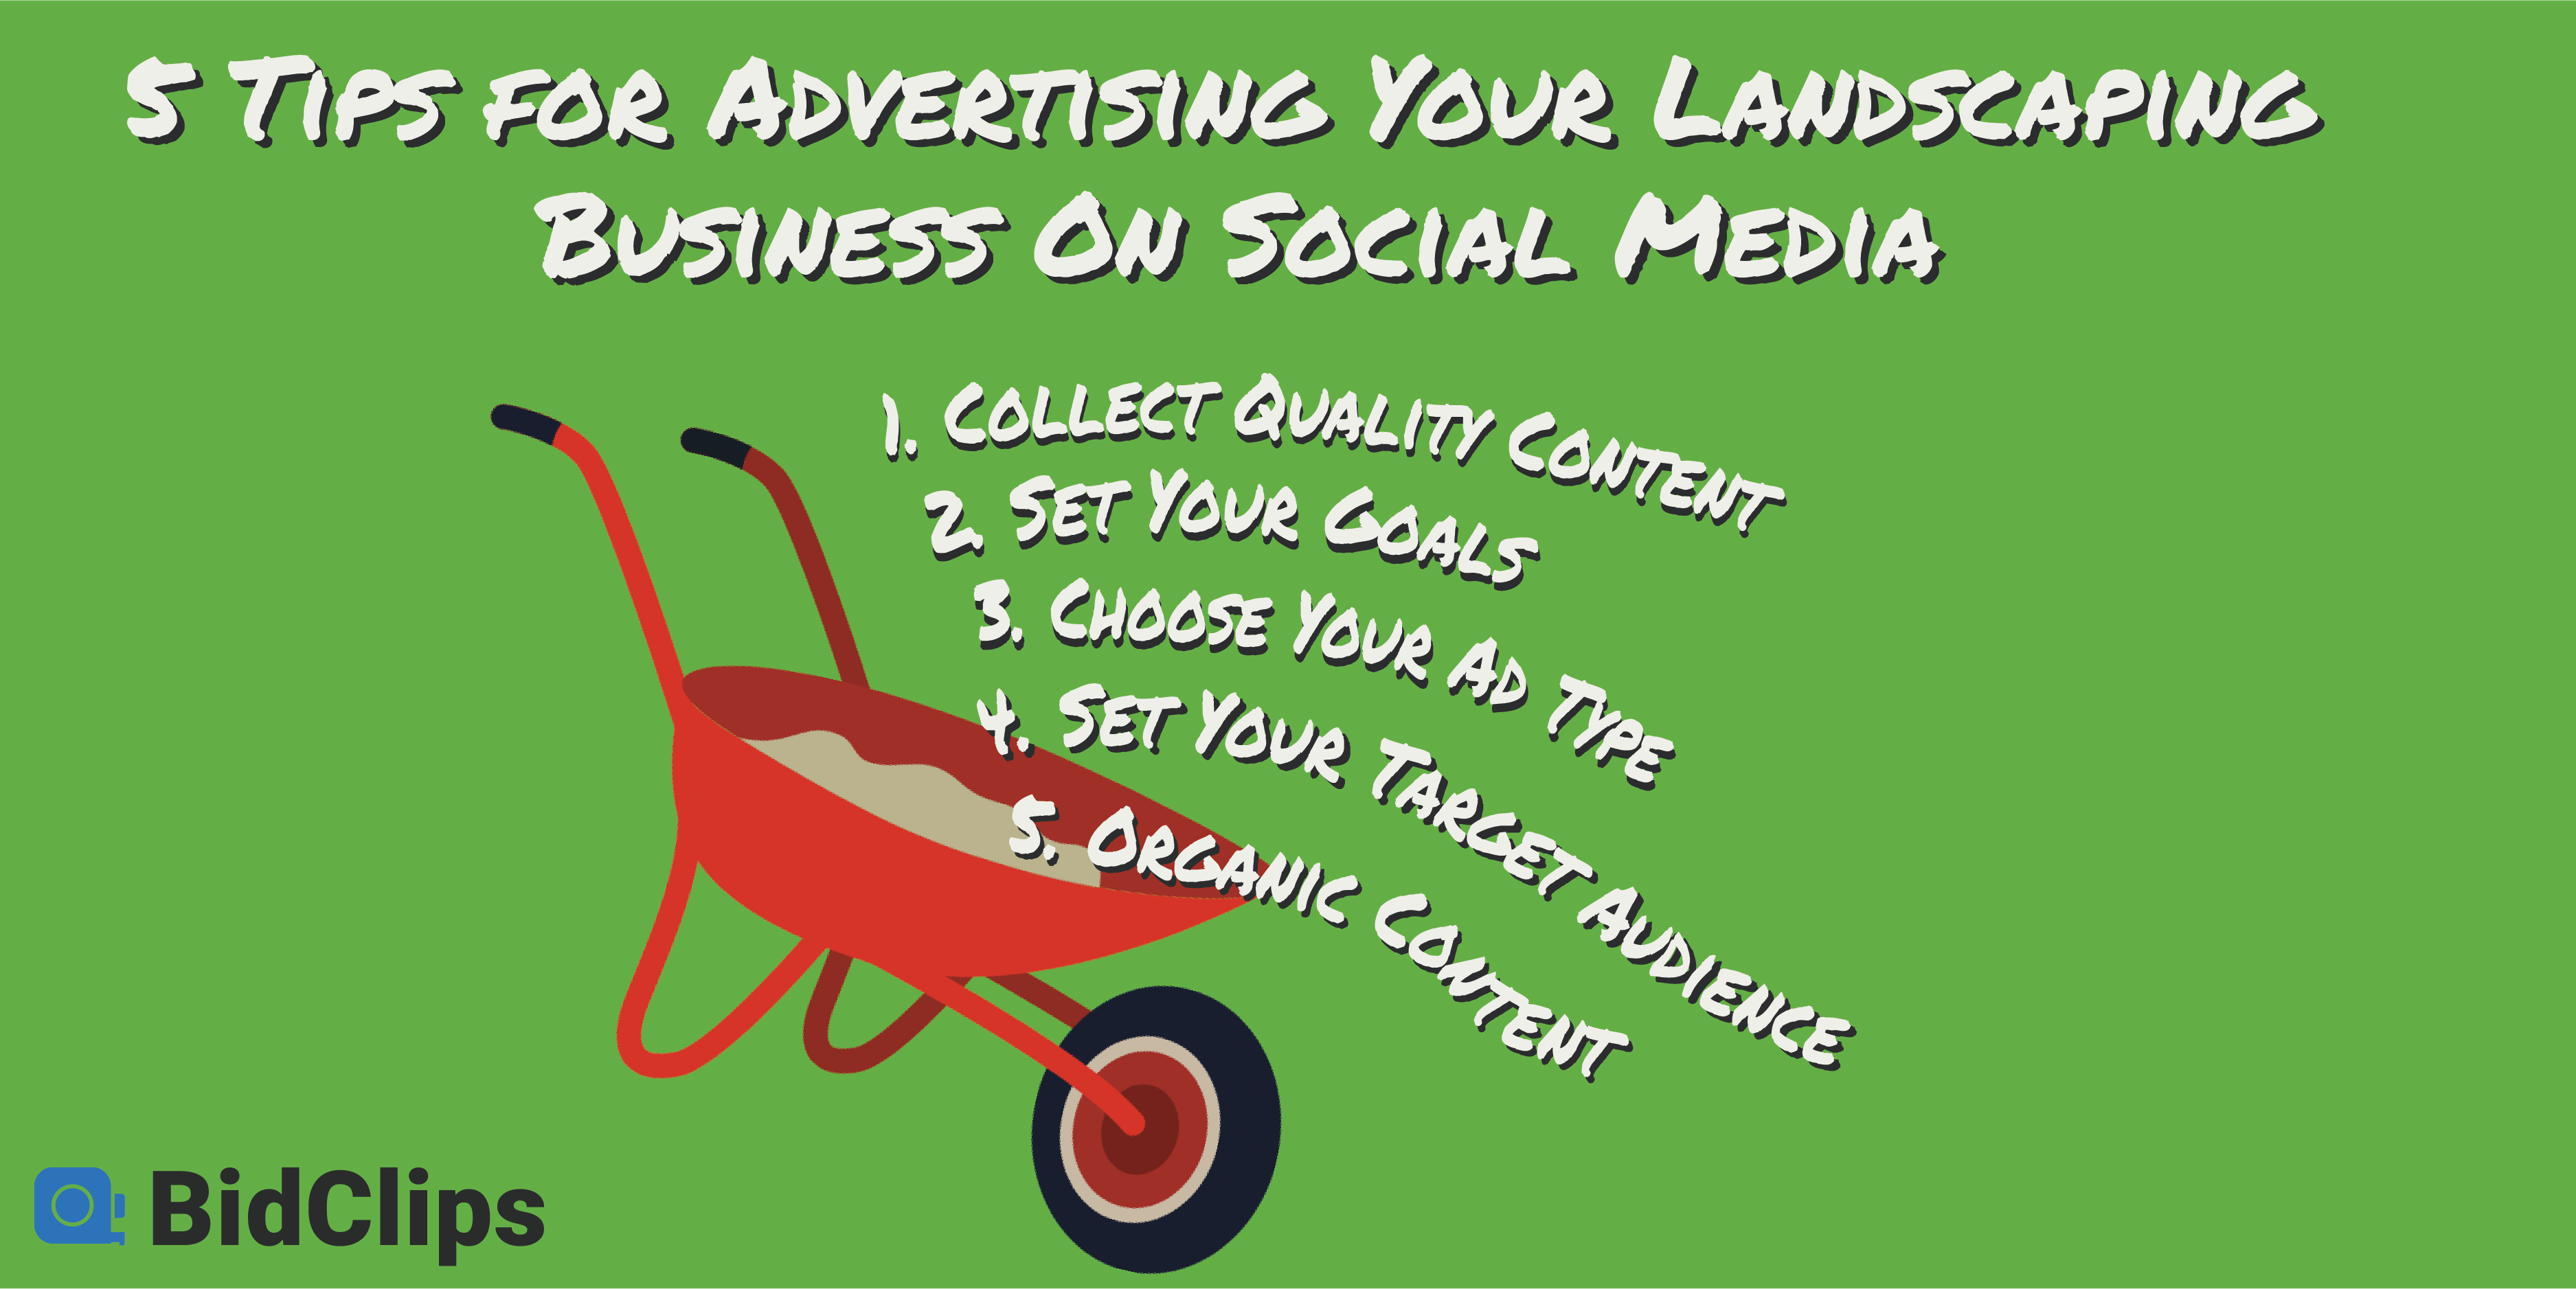 5 tips for advertising your landscaping business on social media